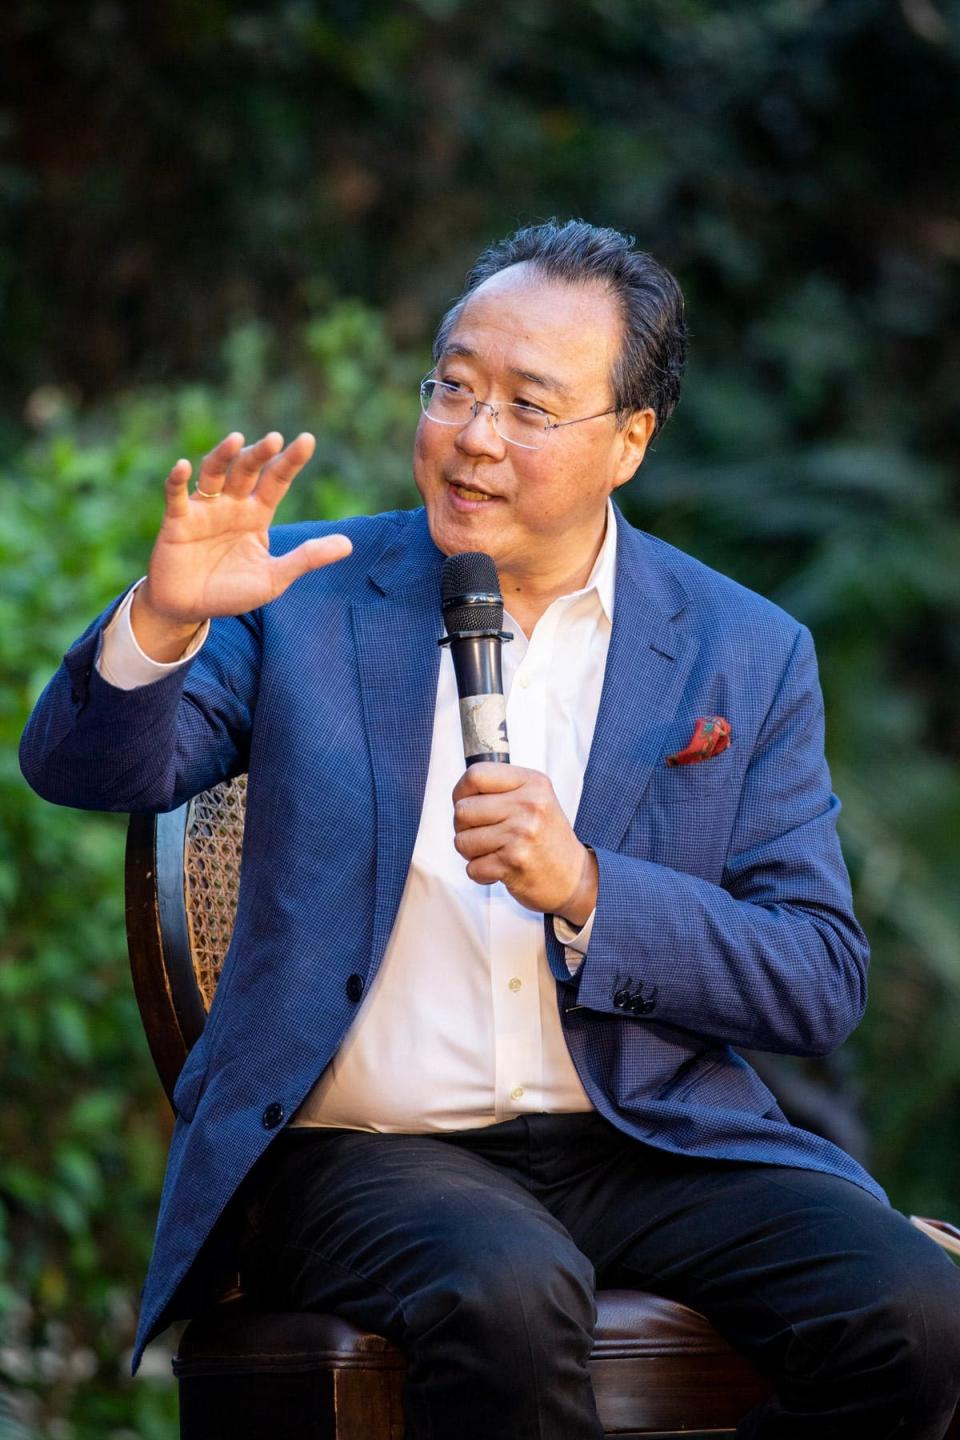 Famed cellist Yo-Yo Ma will be at the Kravis Center in January, in conversation with "PBS Newshour" correspondent Jeffrey Brown.